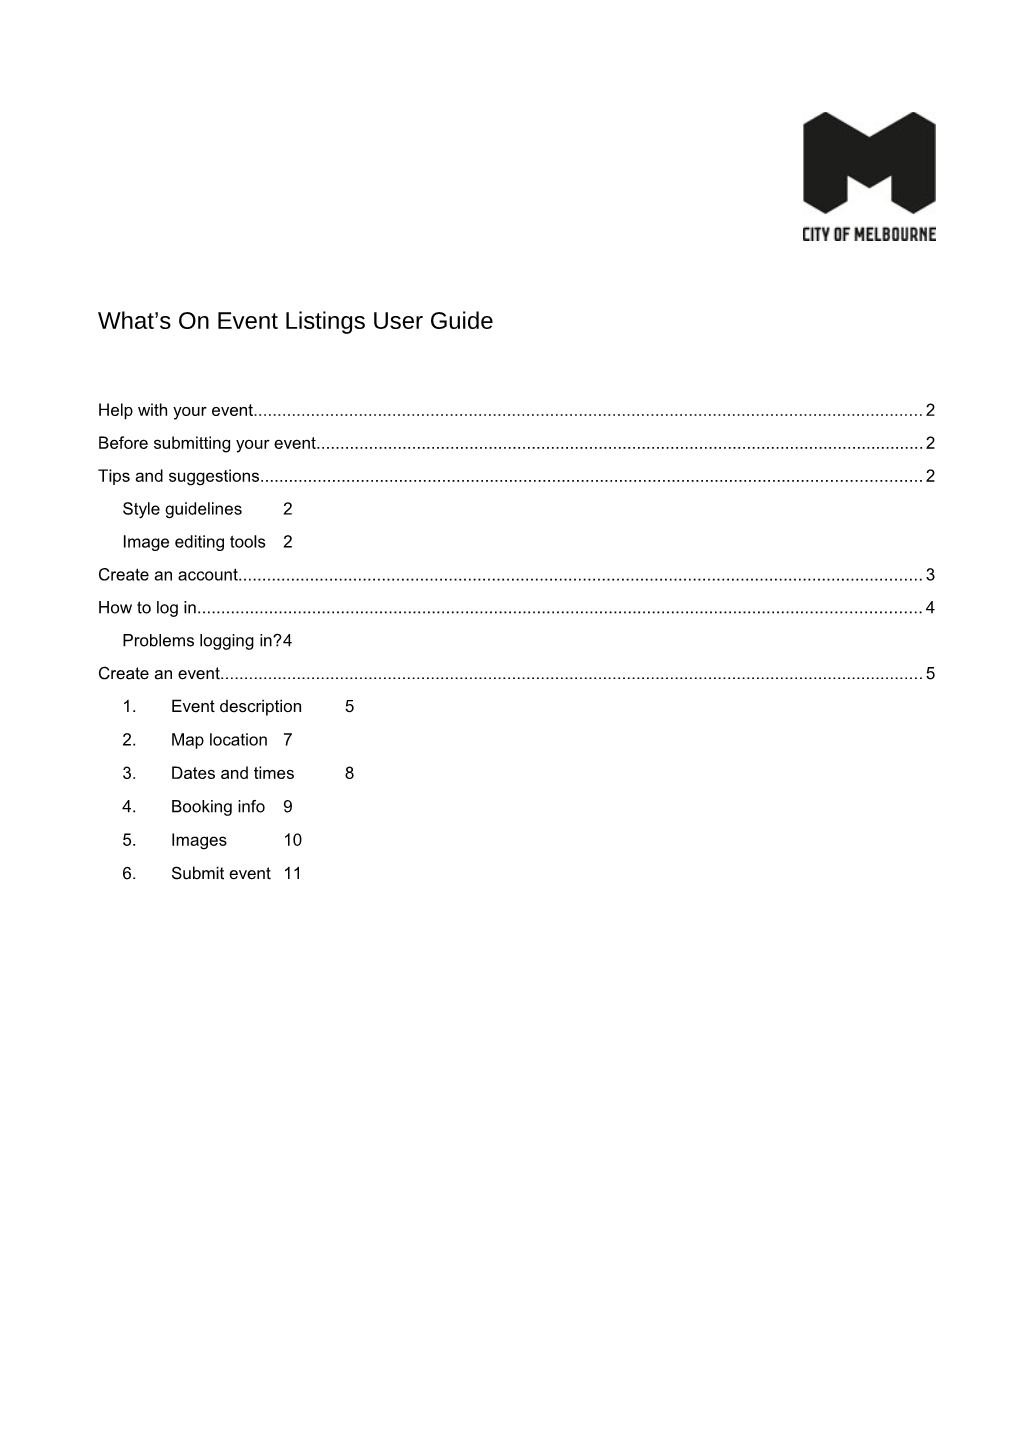 What's on Event Listings User Guide